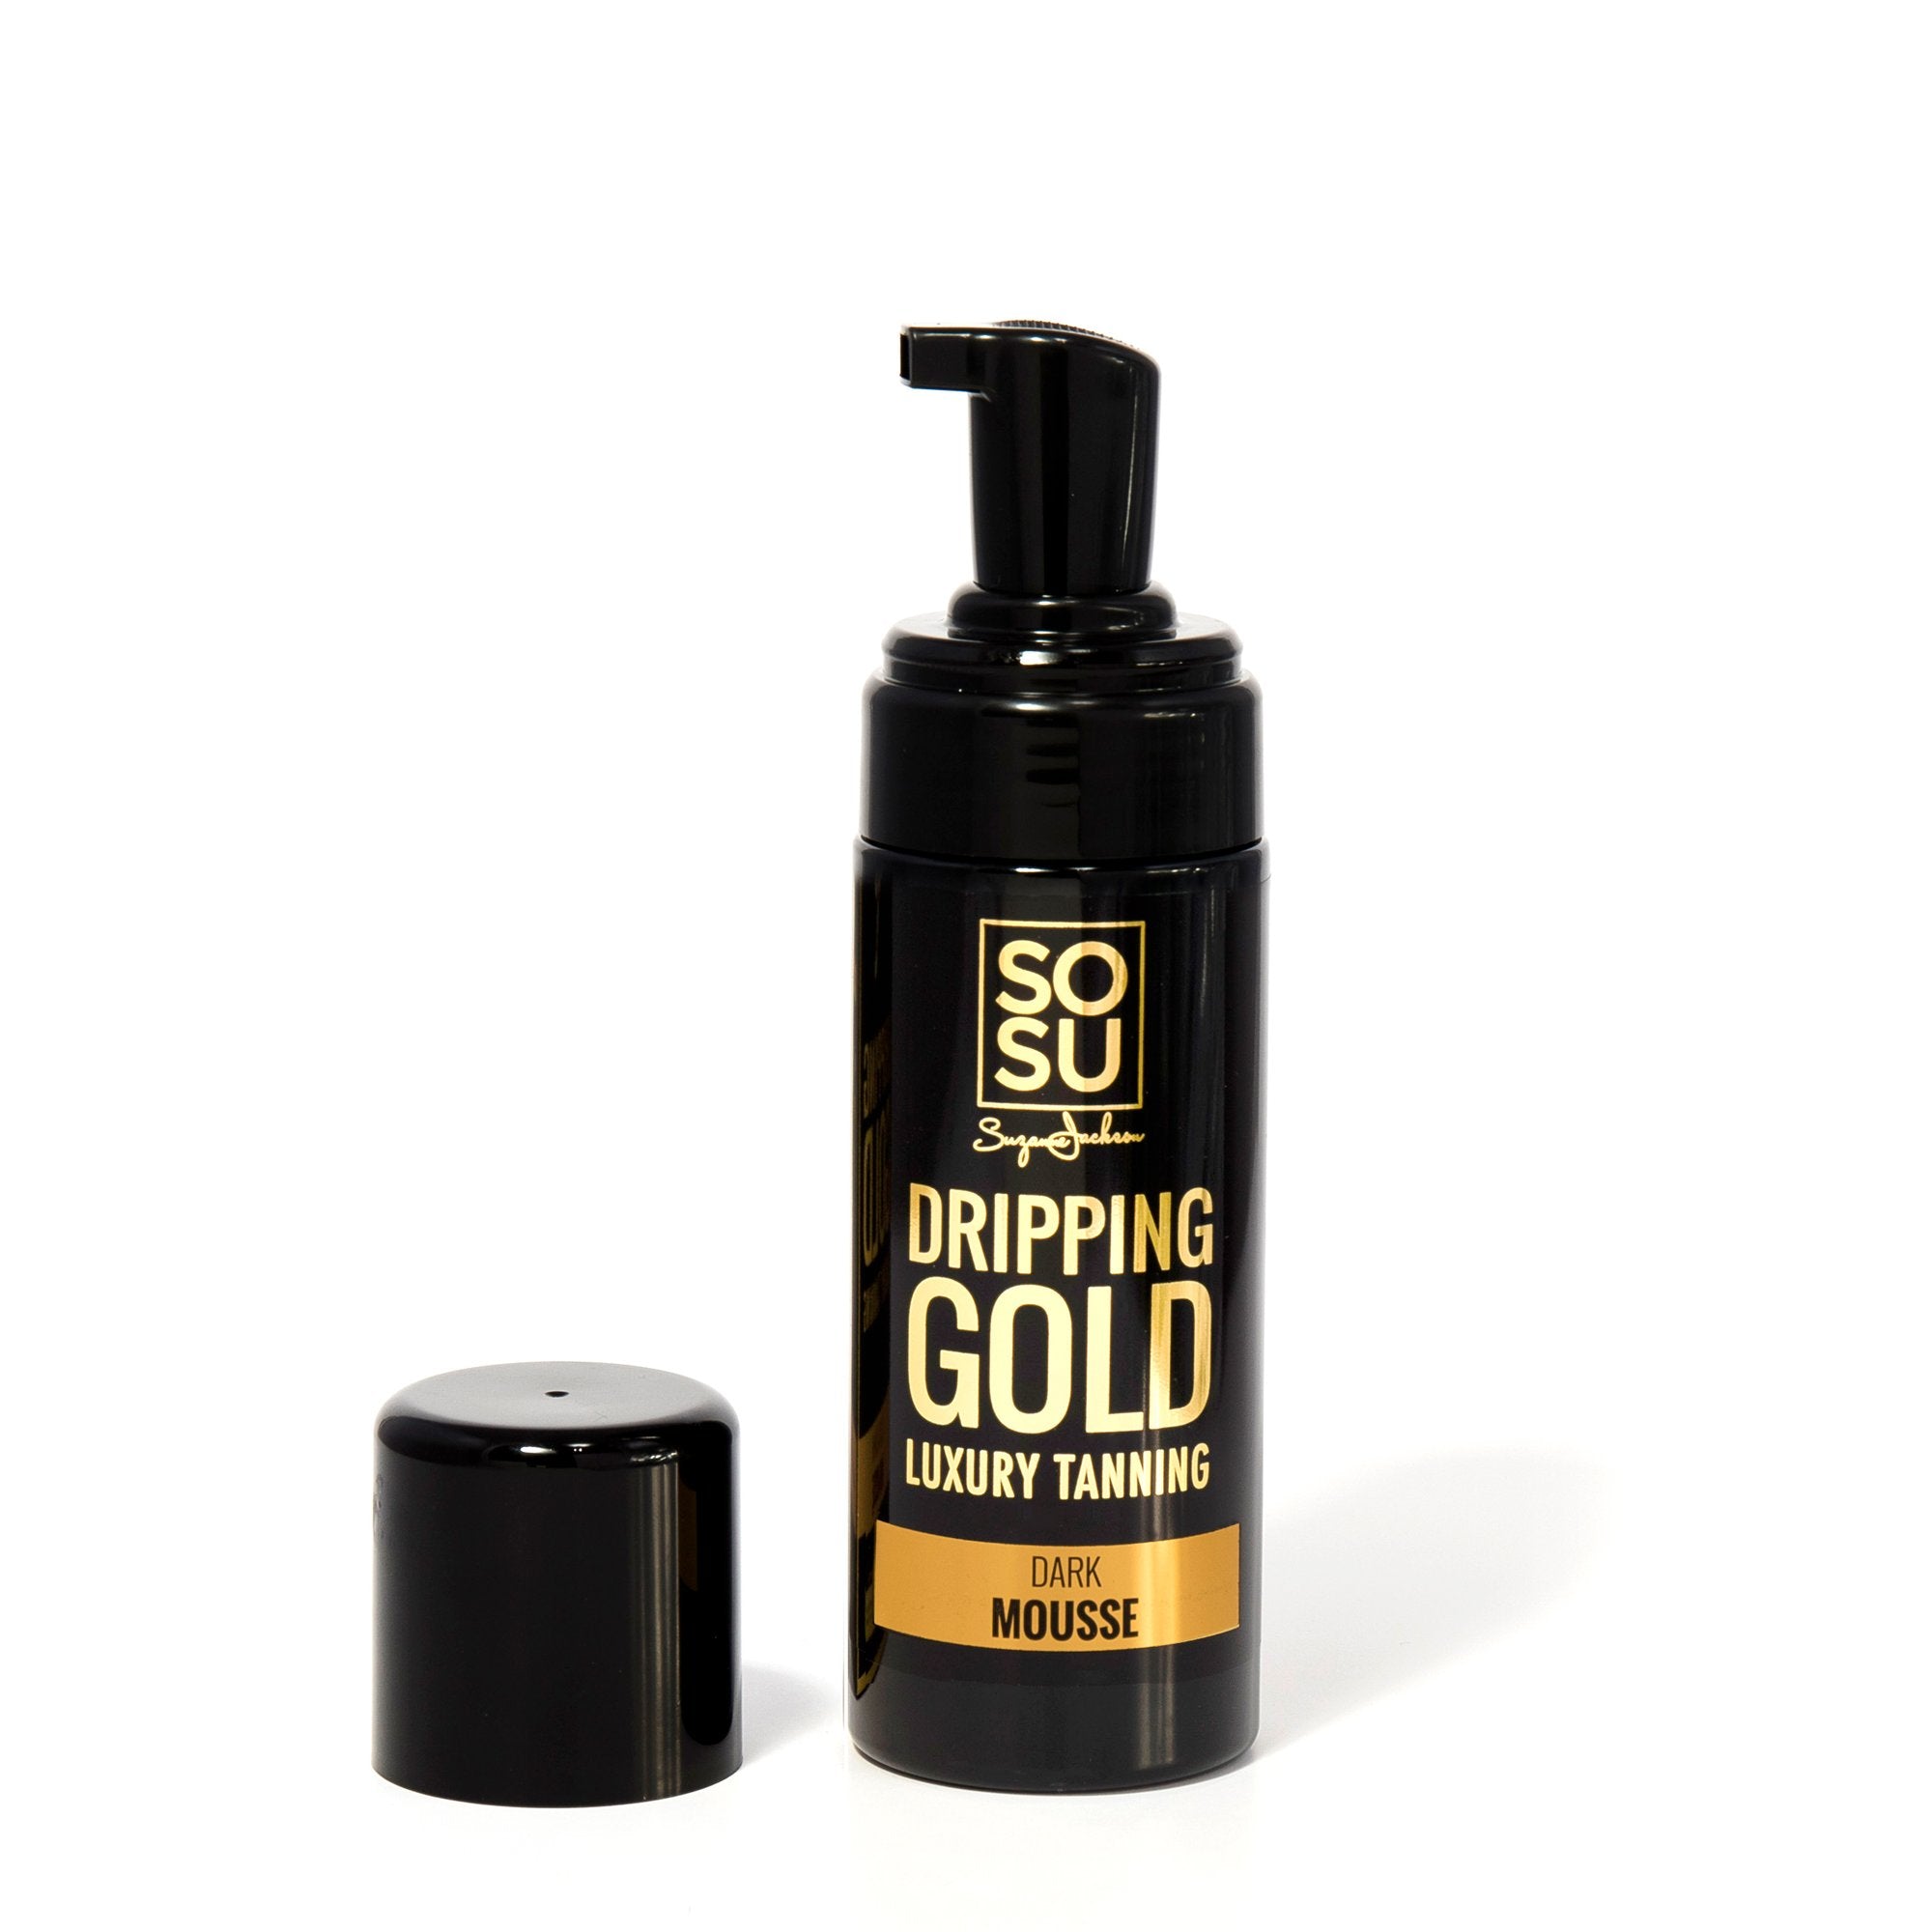 Dripping Gold Tanning Mousse